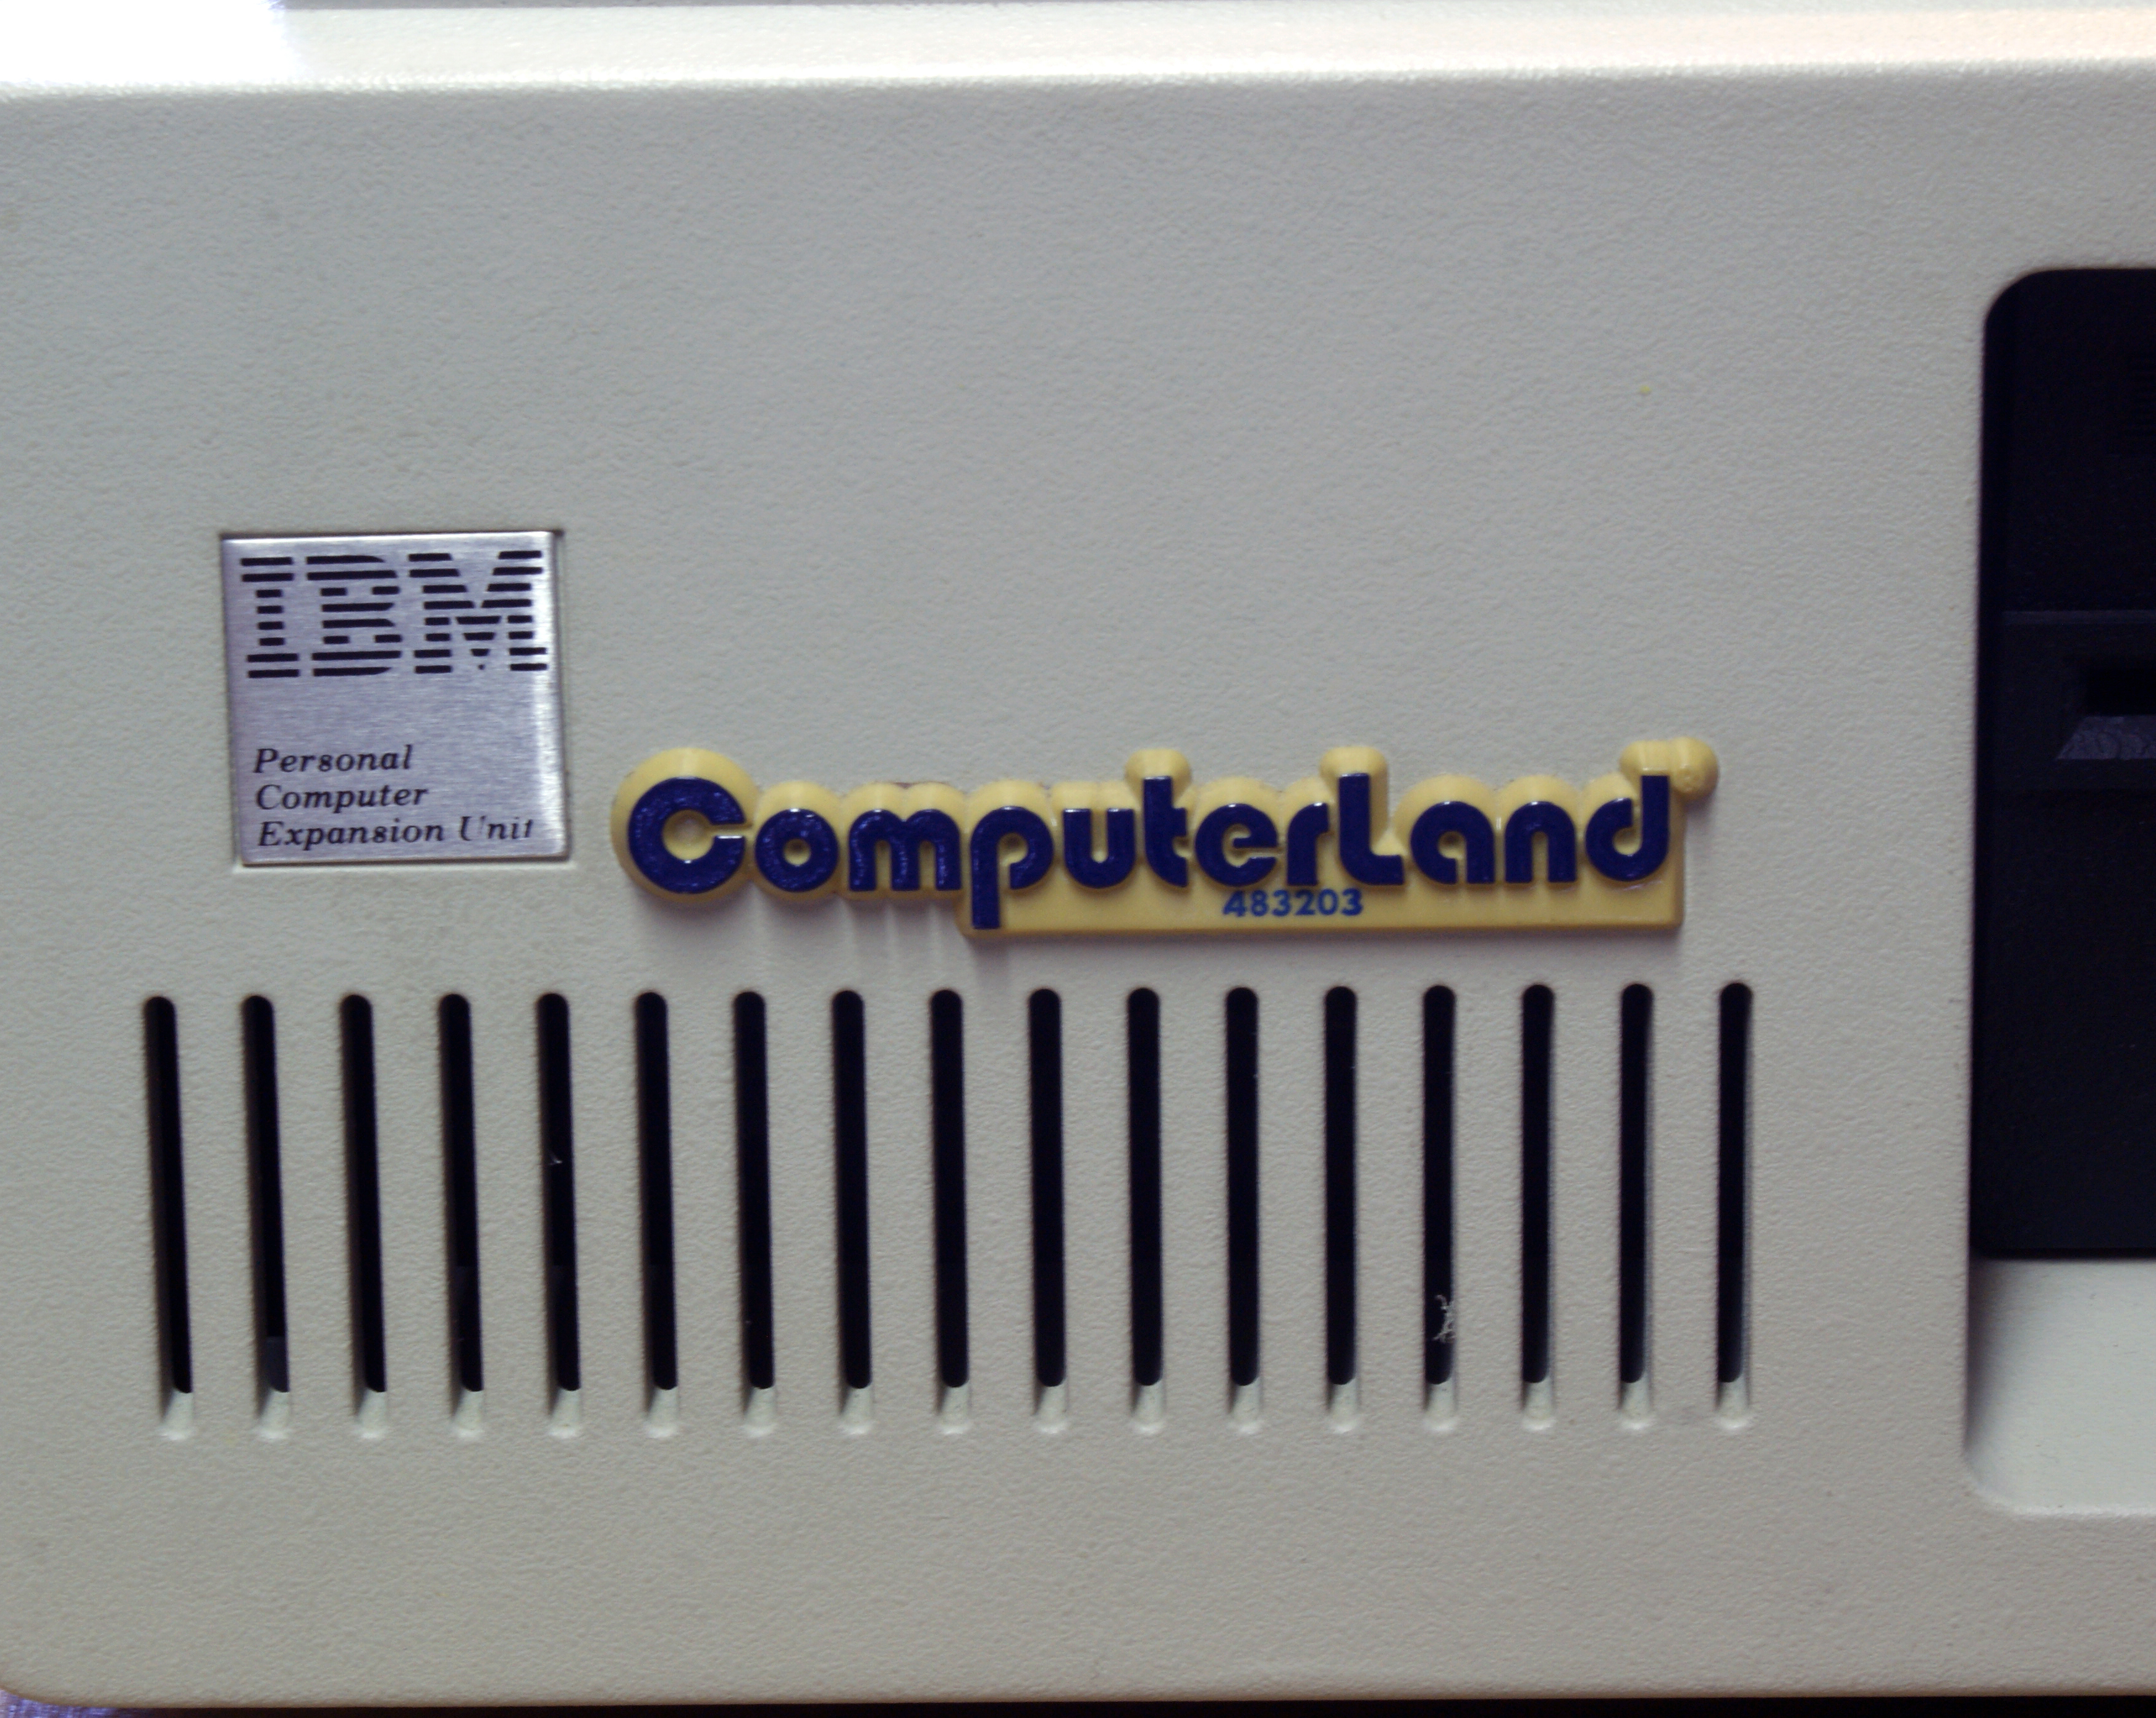 DSC06230a.JPG - This computer was sold by Computerland Luxembourg. What makes it a curiosity is that the label is not correct: it is that of the 5161 expansion unit, a separate unit sold for the IBM PC and XT holding supplementry memory and a possible hard disk. Someone goofed either at the assembly line, or the wrong label was glued in at a later time.